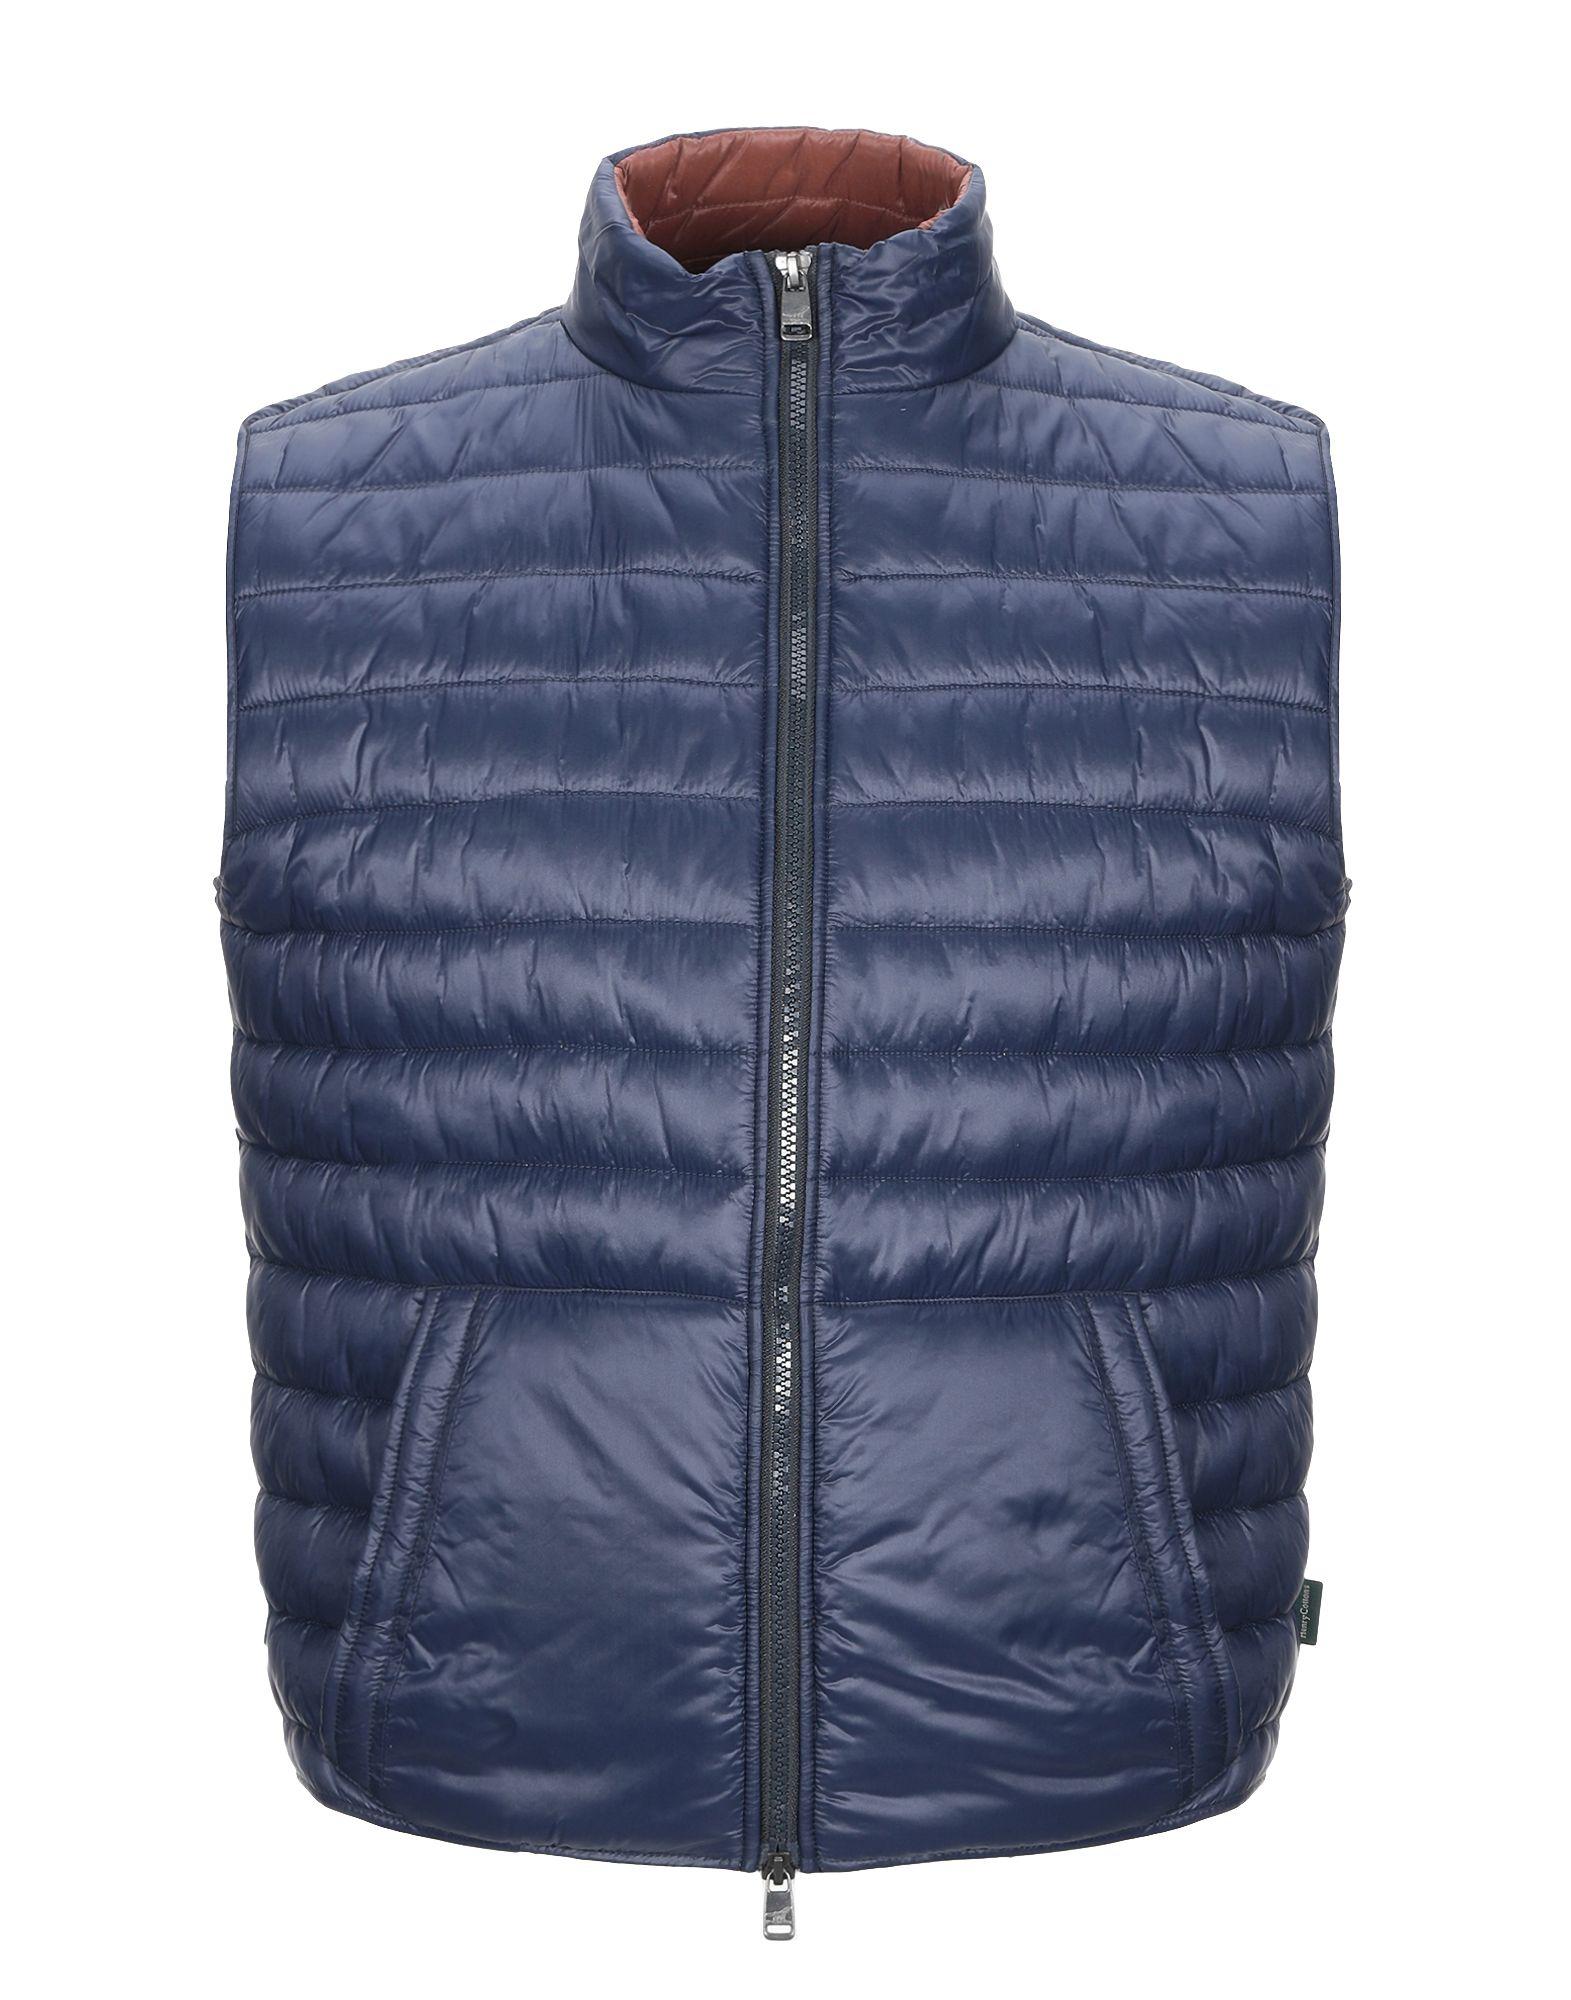 Henry Cotton's Synthetic Jacket in Dark Blue (Blue) for Men - Lyst